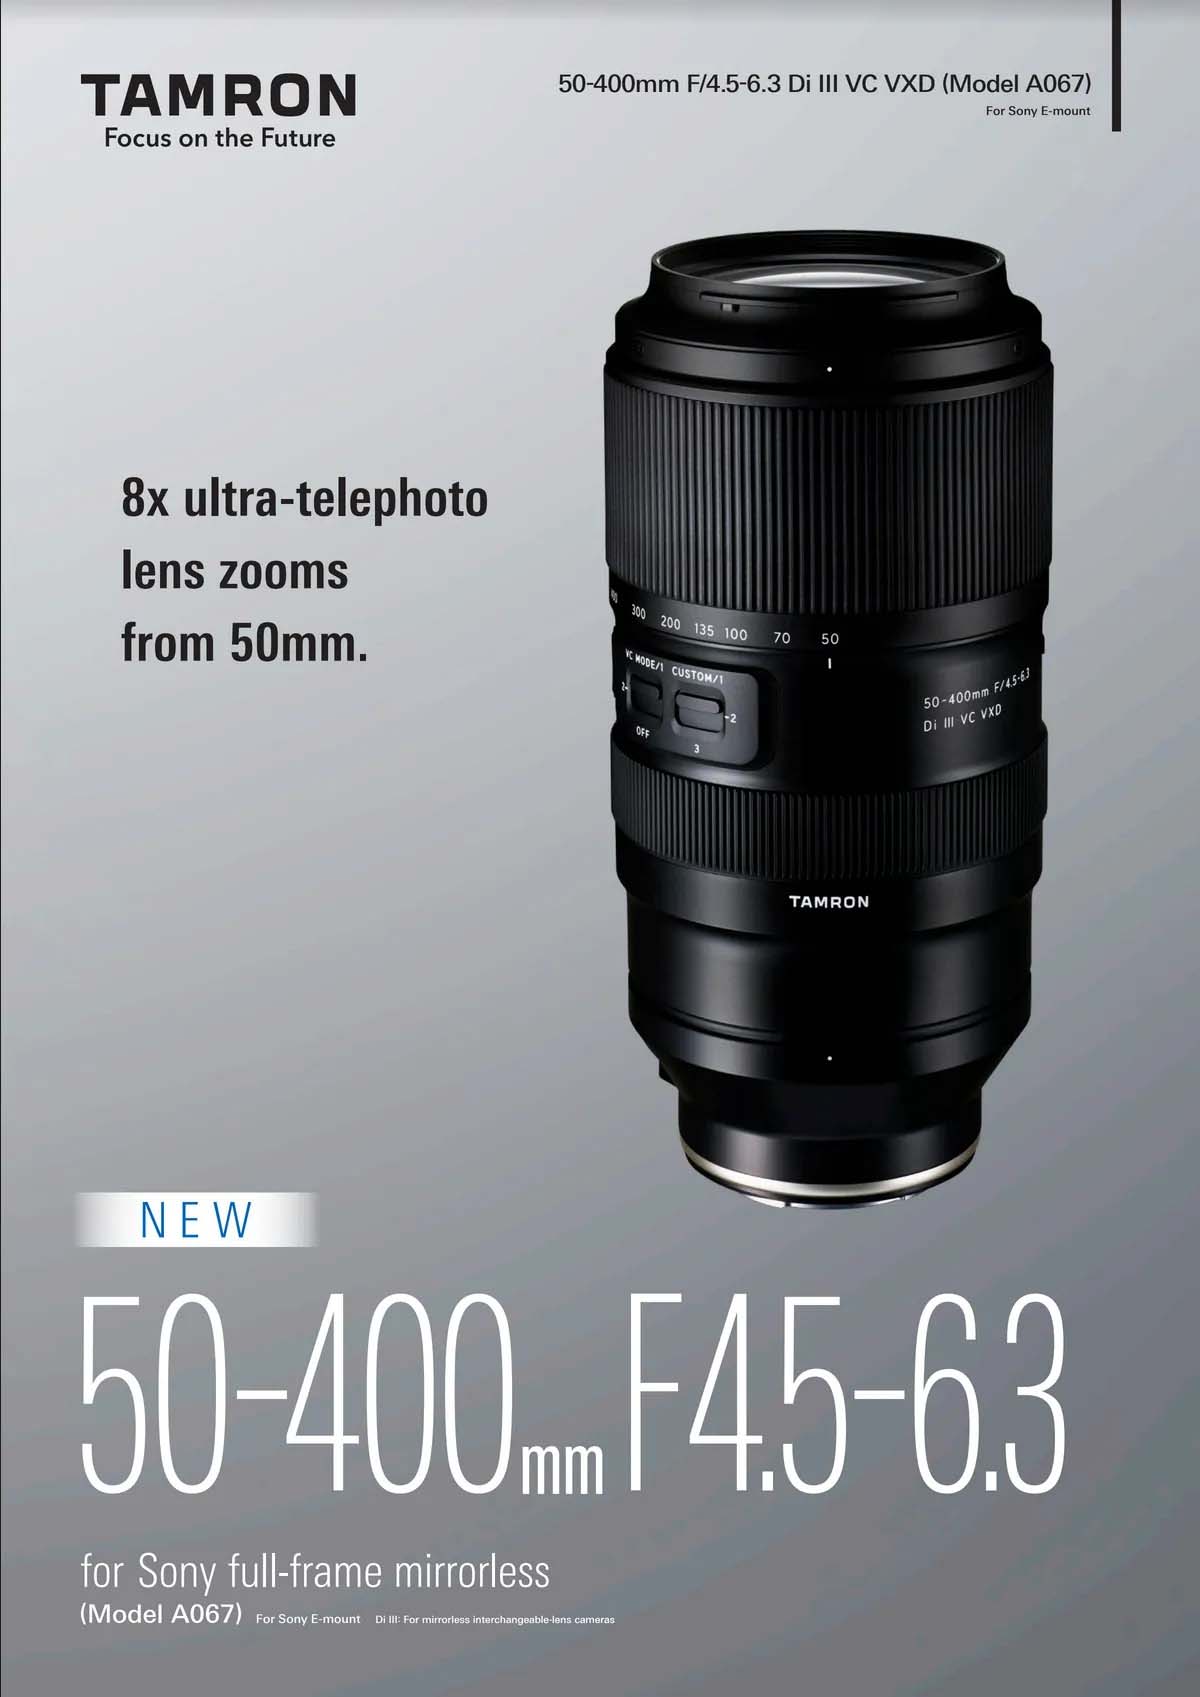 Tamron 50-400mm f/4.5-6.3 Di III VC VXD Catalog and Release Date